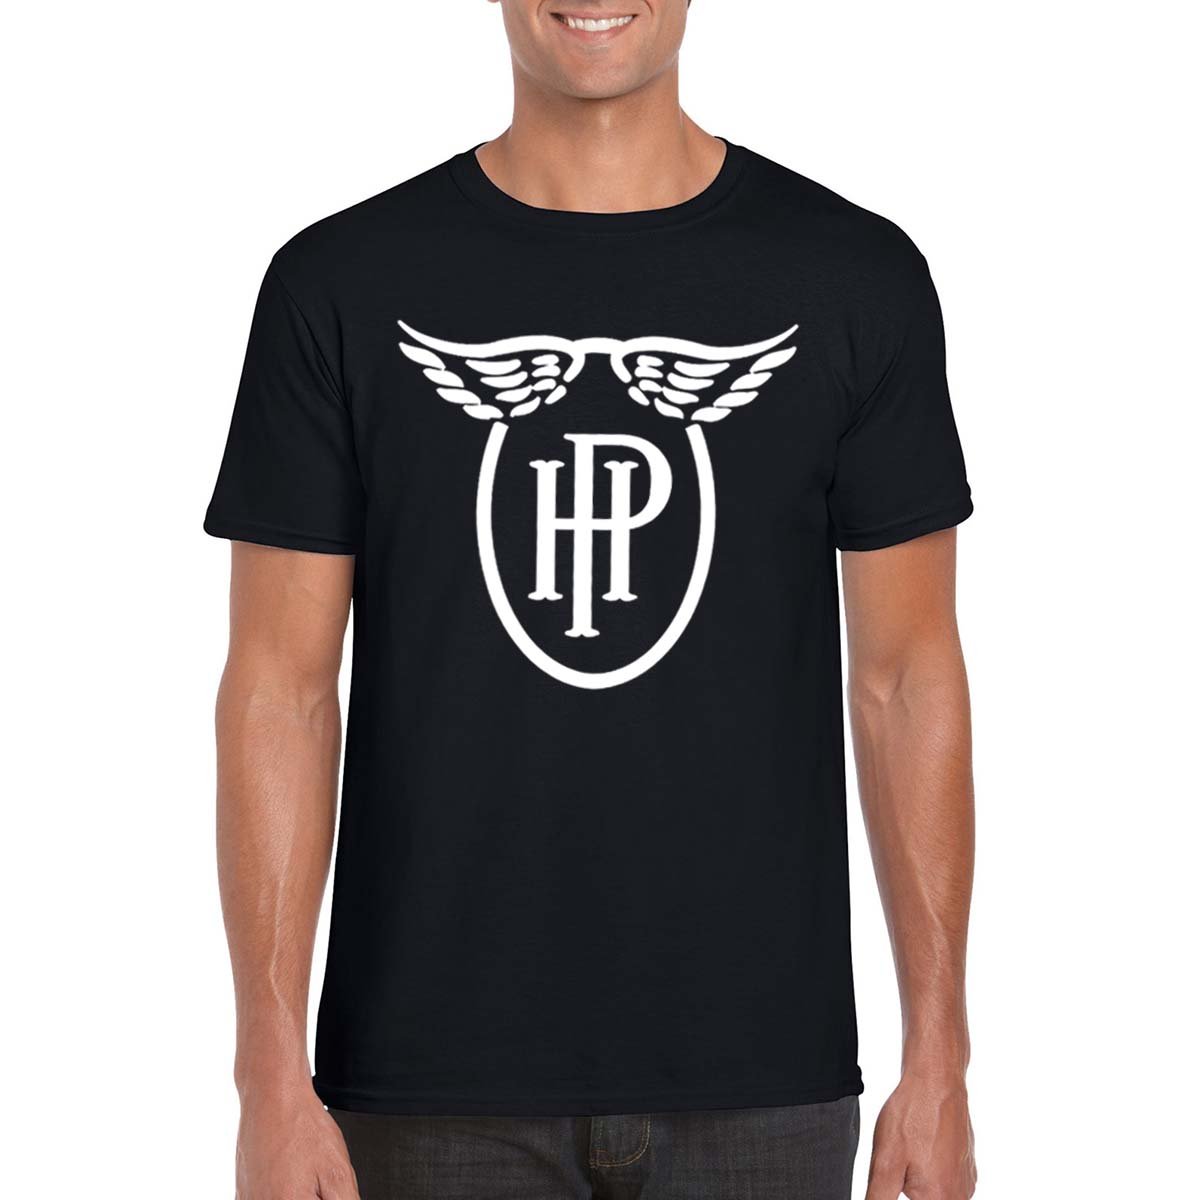 HANDLEY PAGE Vintage Aviation T-Shirt